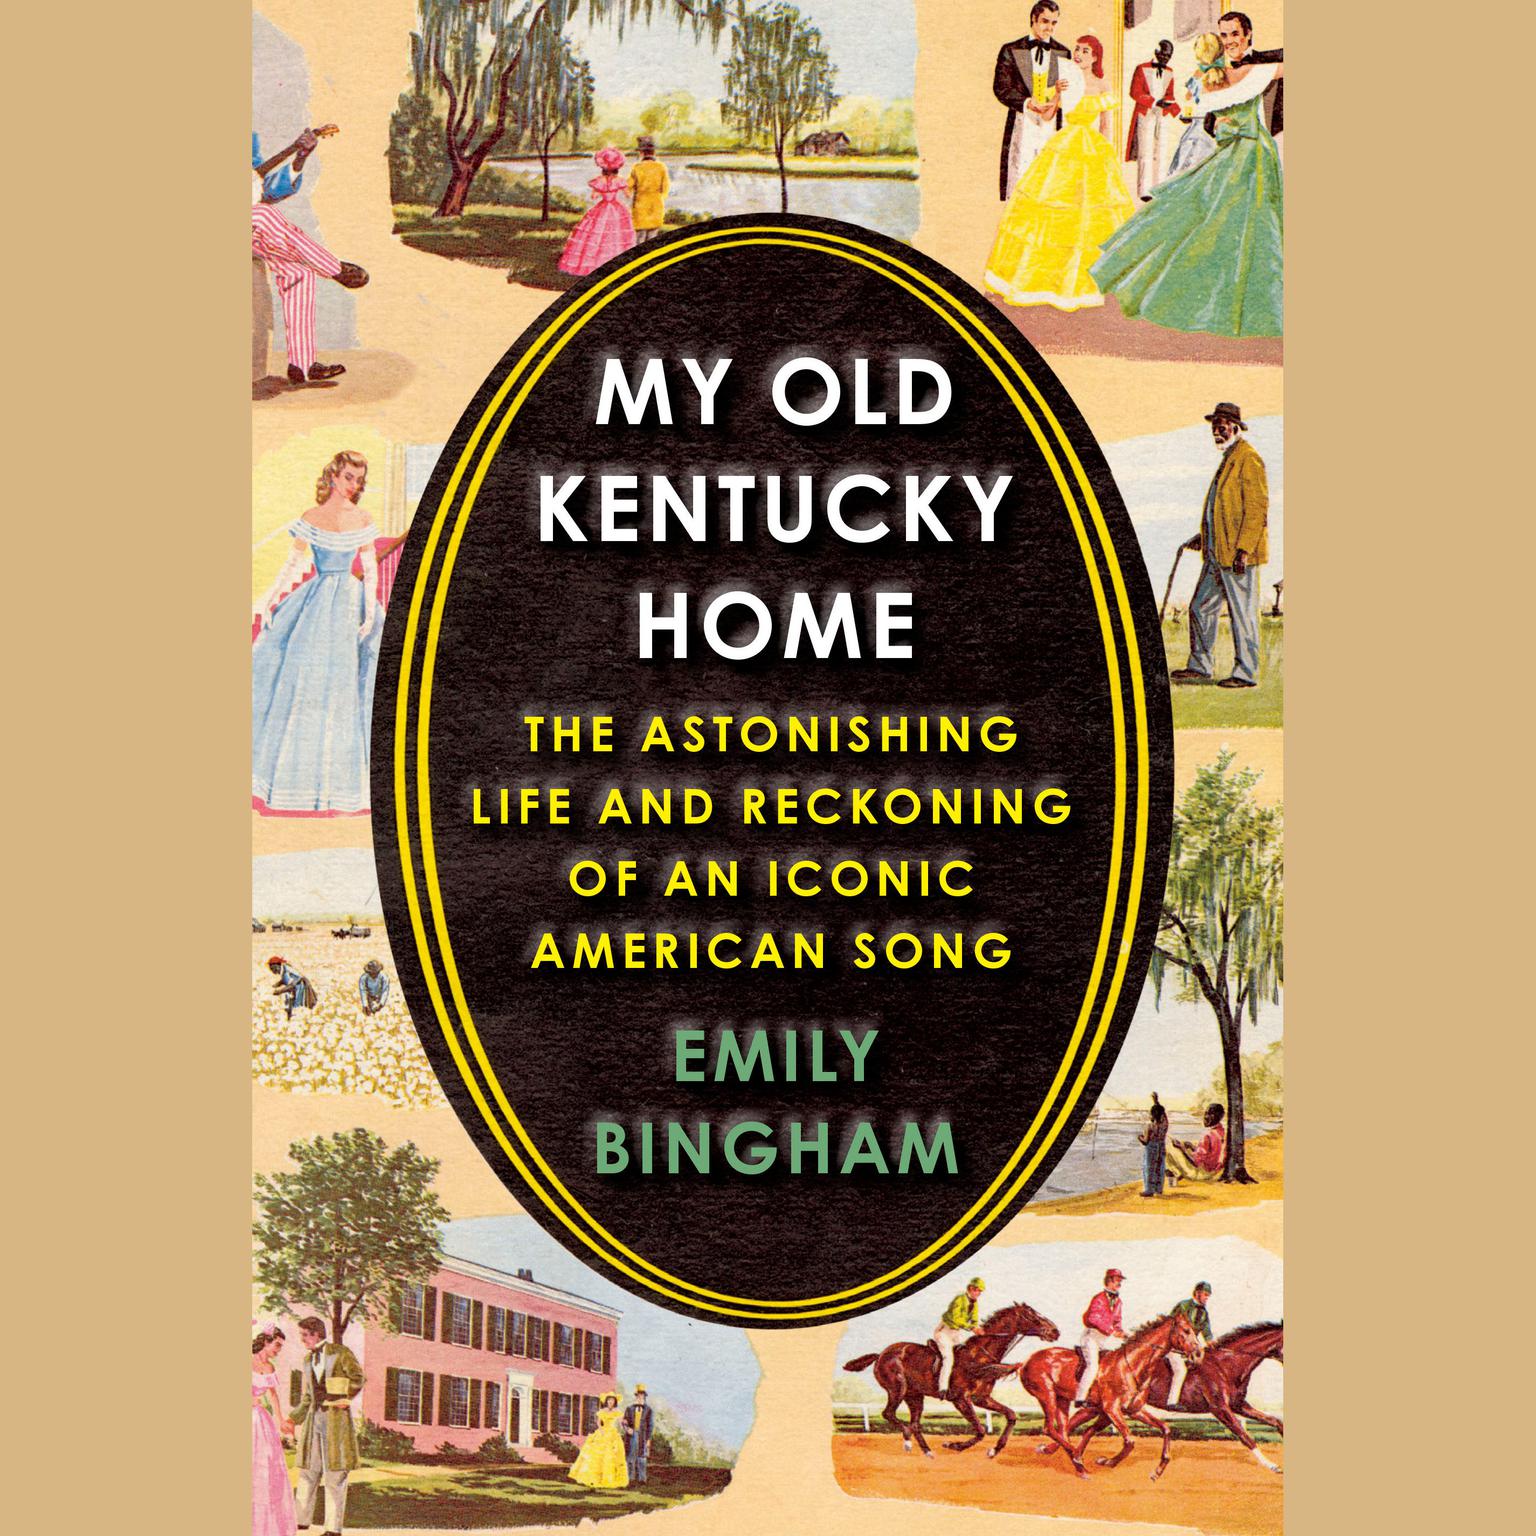 My Old Kentucky Home: The Astonishing Life and Reckoning of an Iconic American Song Audiobook, by Emily Bingham